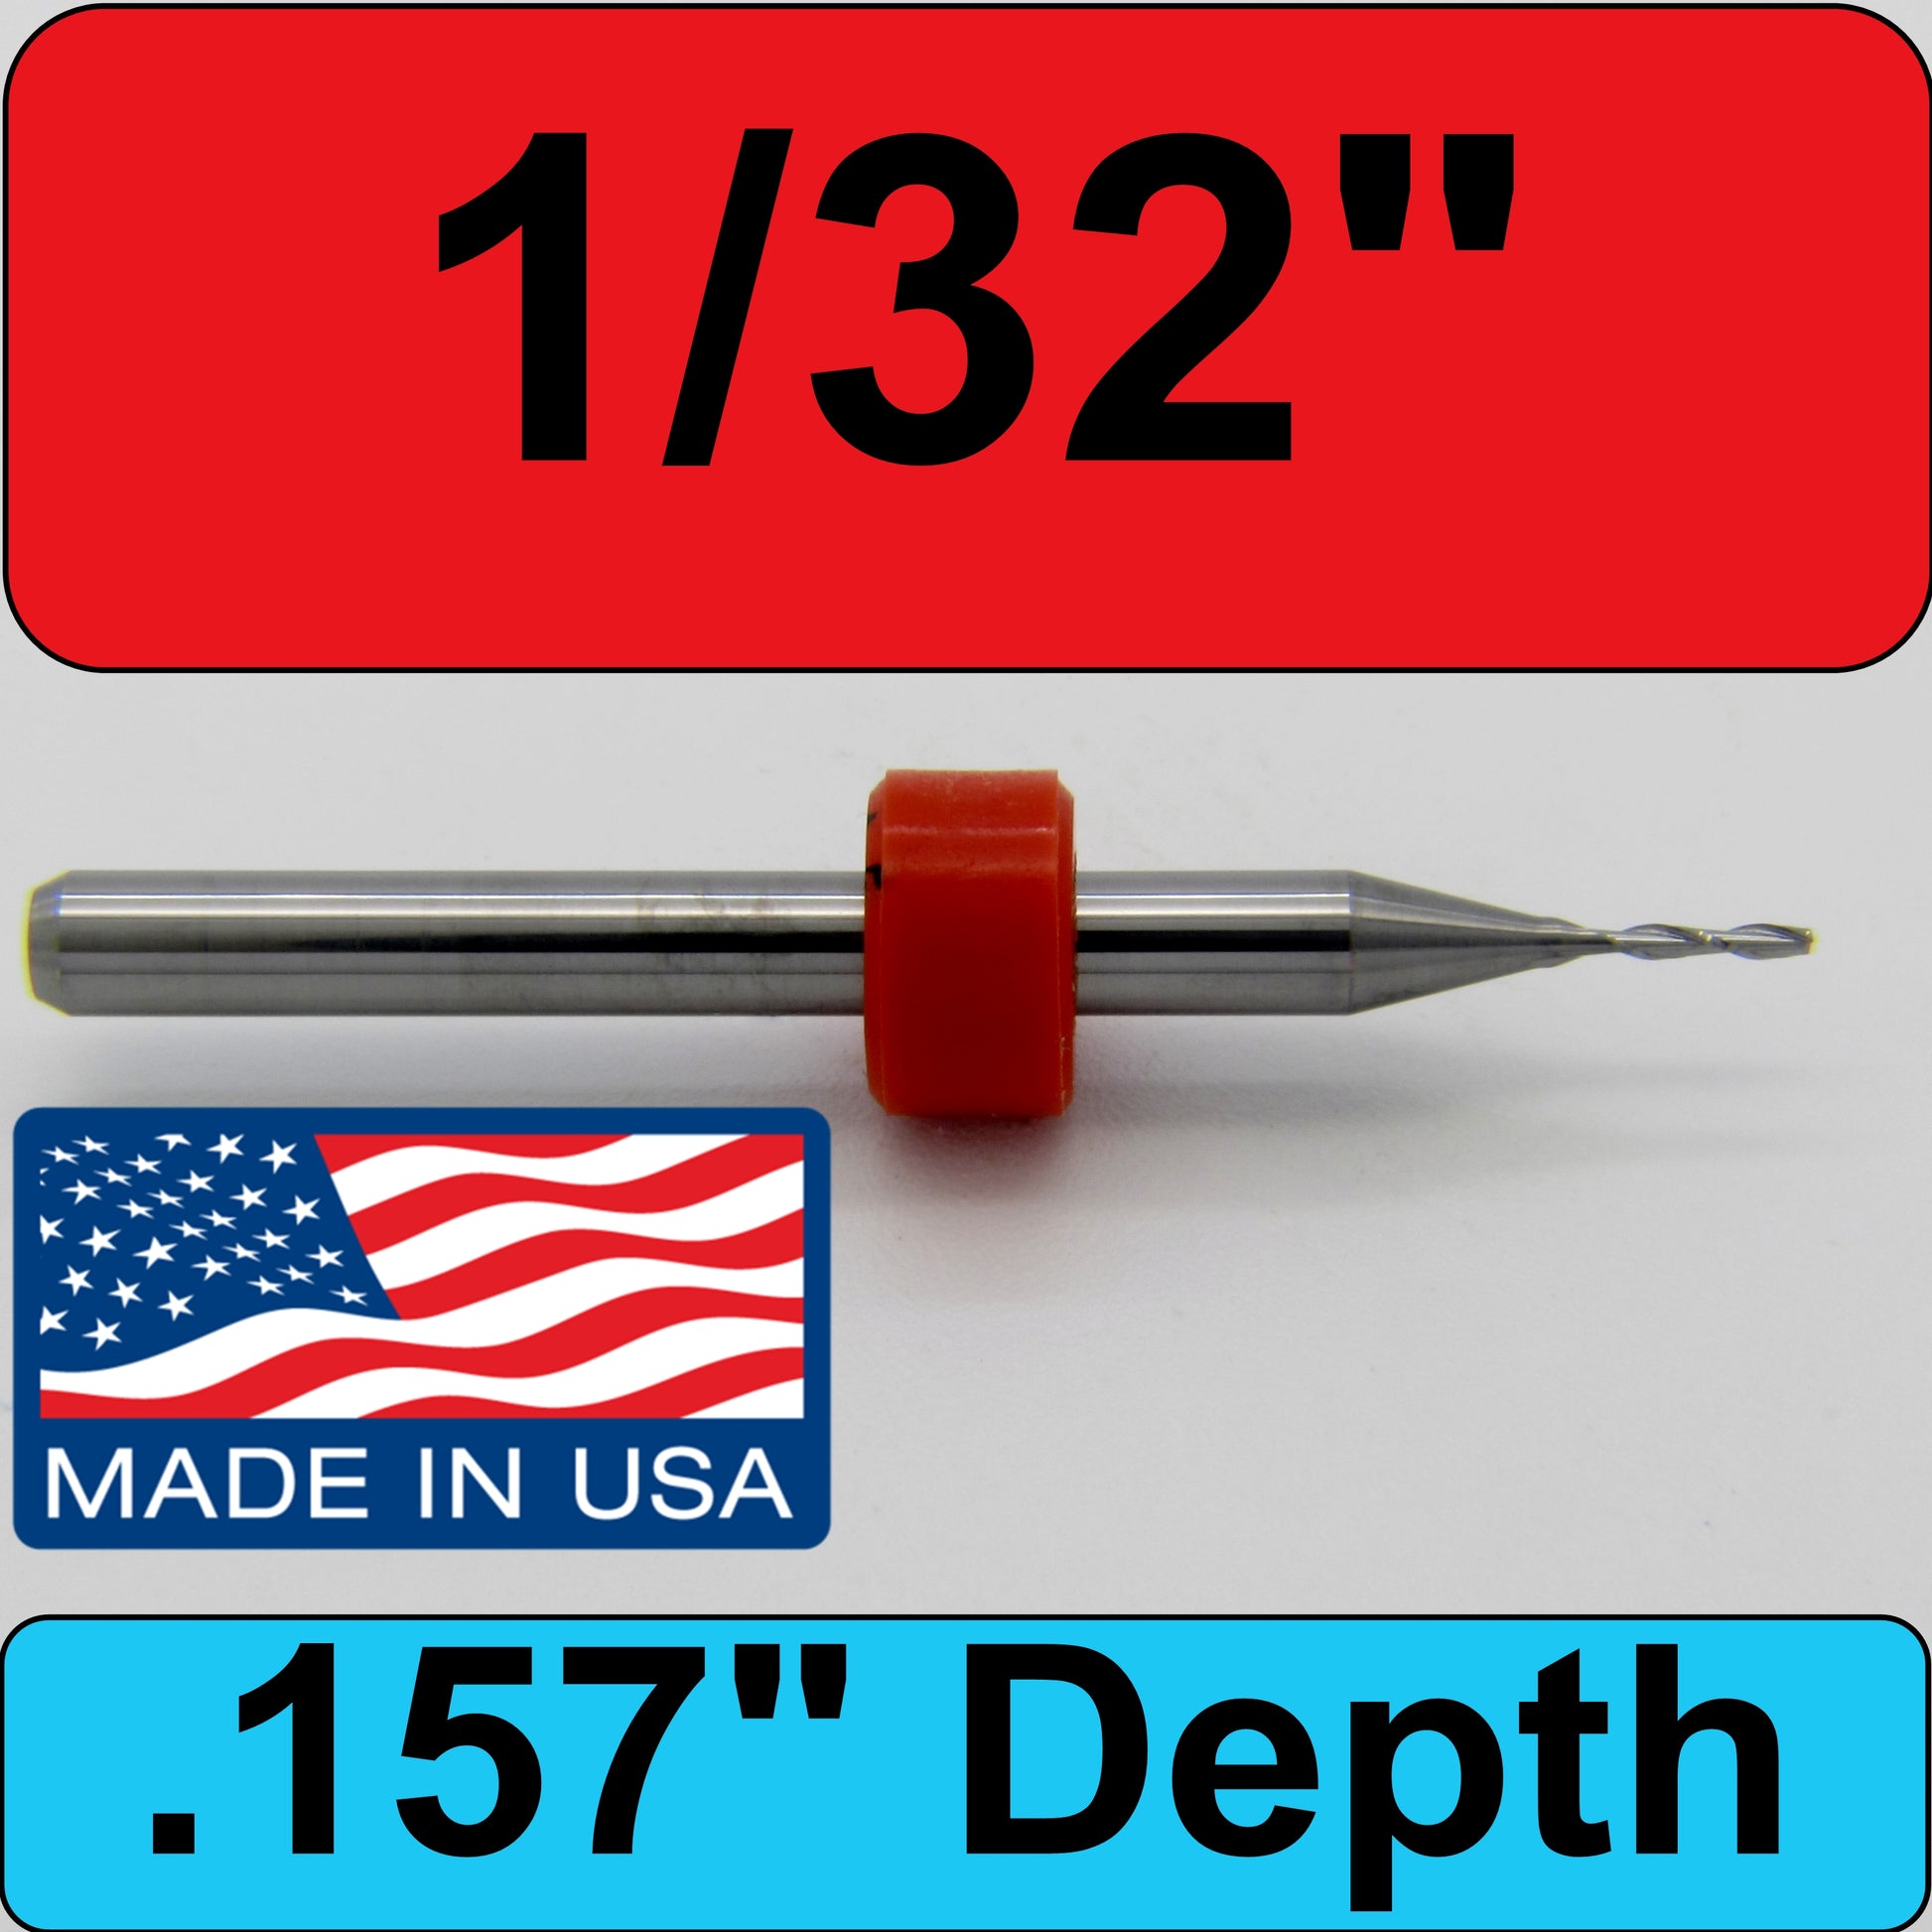 .0315" 1/32" Two Flute Carbide End Mill